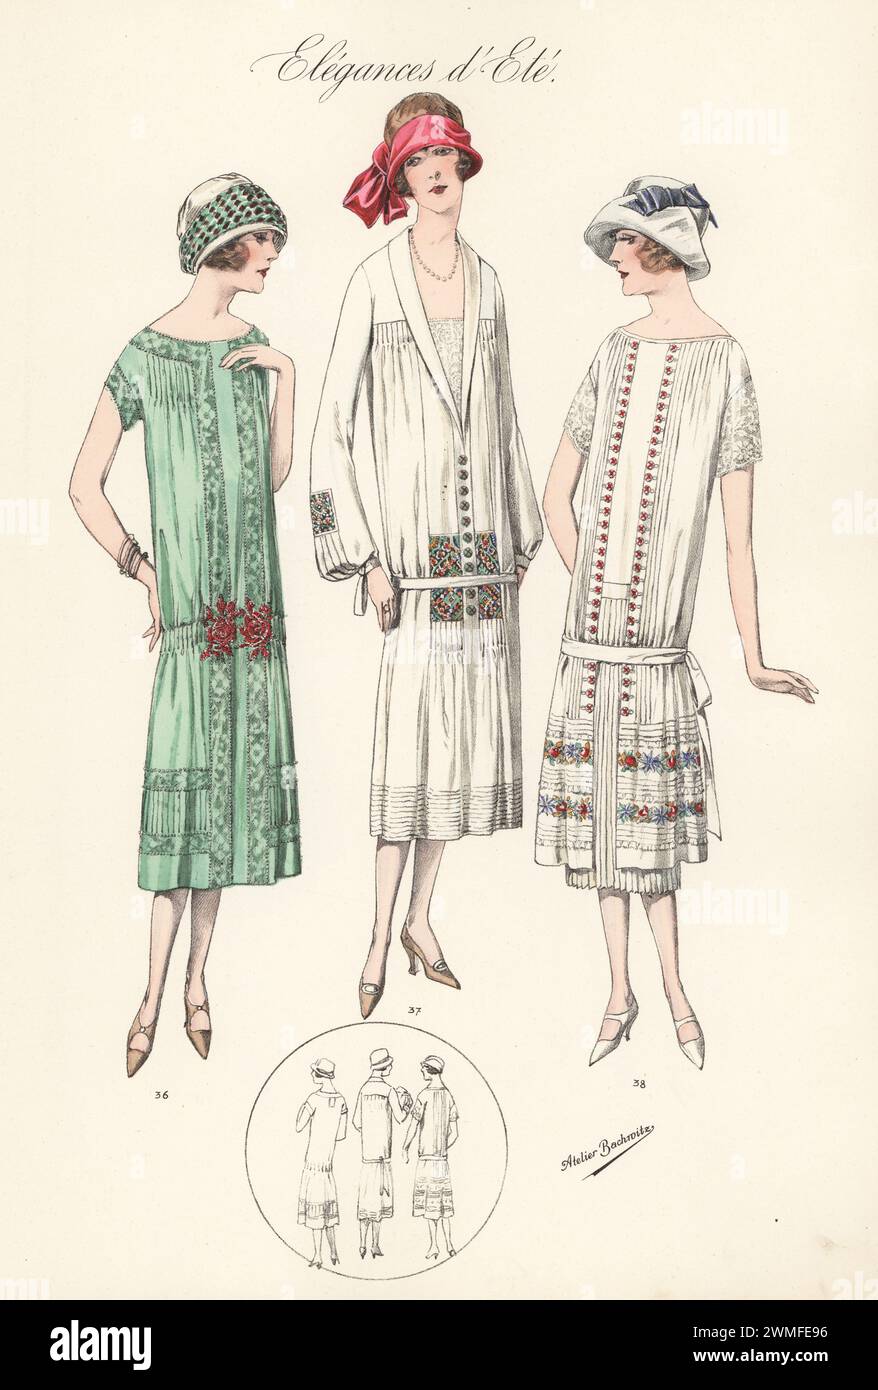 Flappers in cloche hats with ribbons and summer frocks, 1925. Dress in crepe Georgette with lace entre-deux edged with glass beads 36, Japanese silk dress with embroidered panels 37, and tunic in Georgette with vertical and horizontal tucks 38. Handcoloured lithograph by Atelier Bachwitz from Modell-Kleider fur den Hochsommer, Elegances d’Ete, Fashions for the Hot Season, Atelier Bachwitz AG, Vienna, 1925. Stock Photo